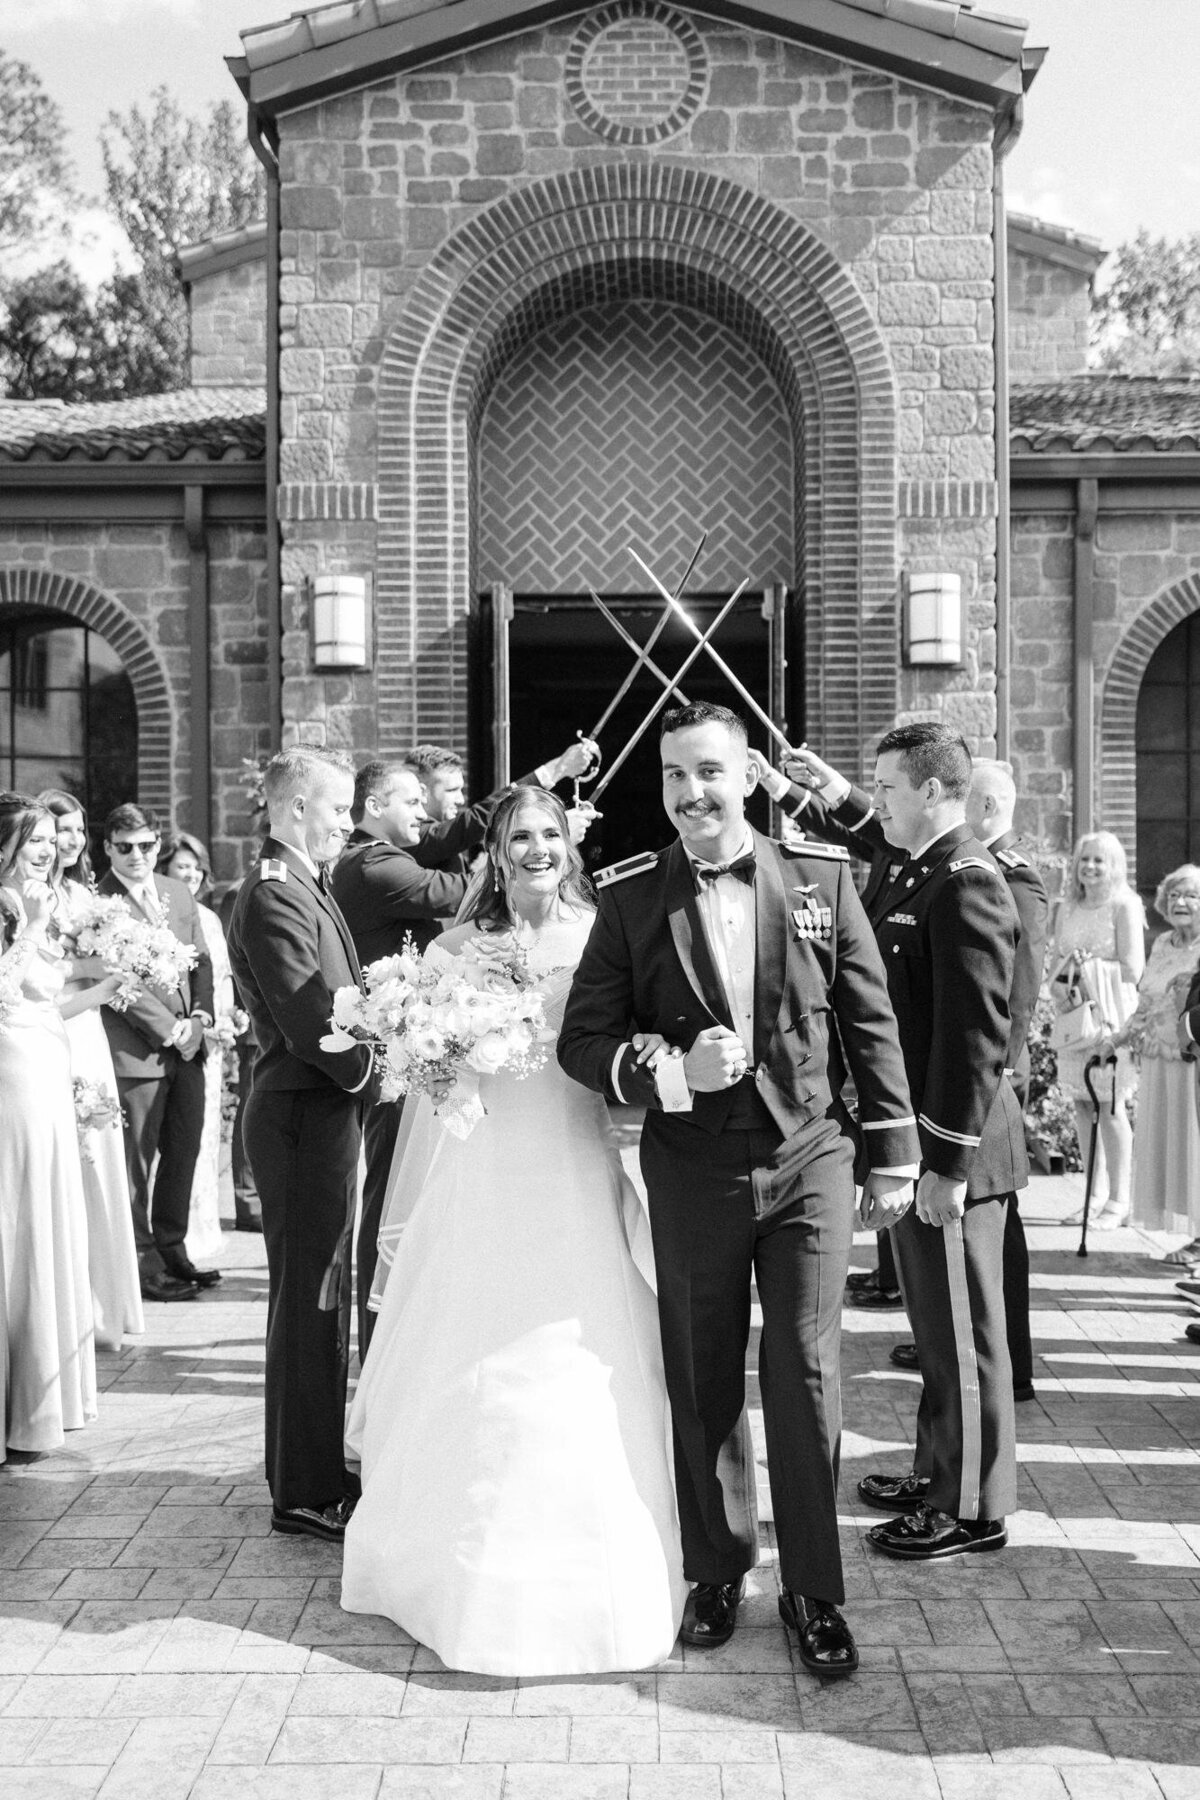 A newlywed couple exits a church while smiling as they pass under an arch of sabers held by uniformed military personnel.